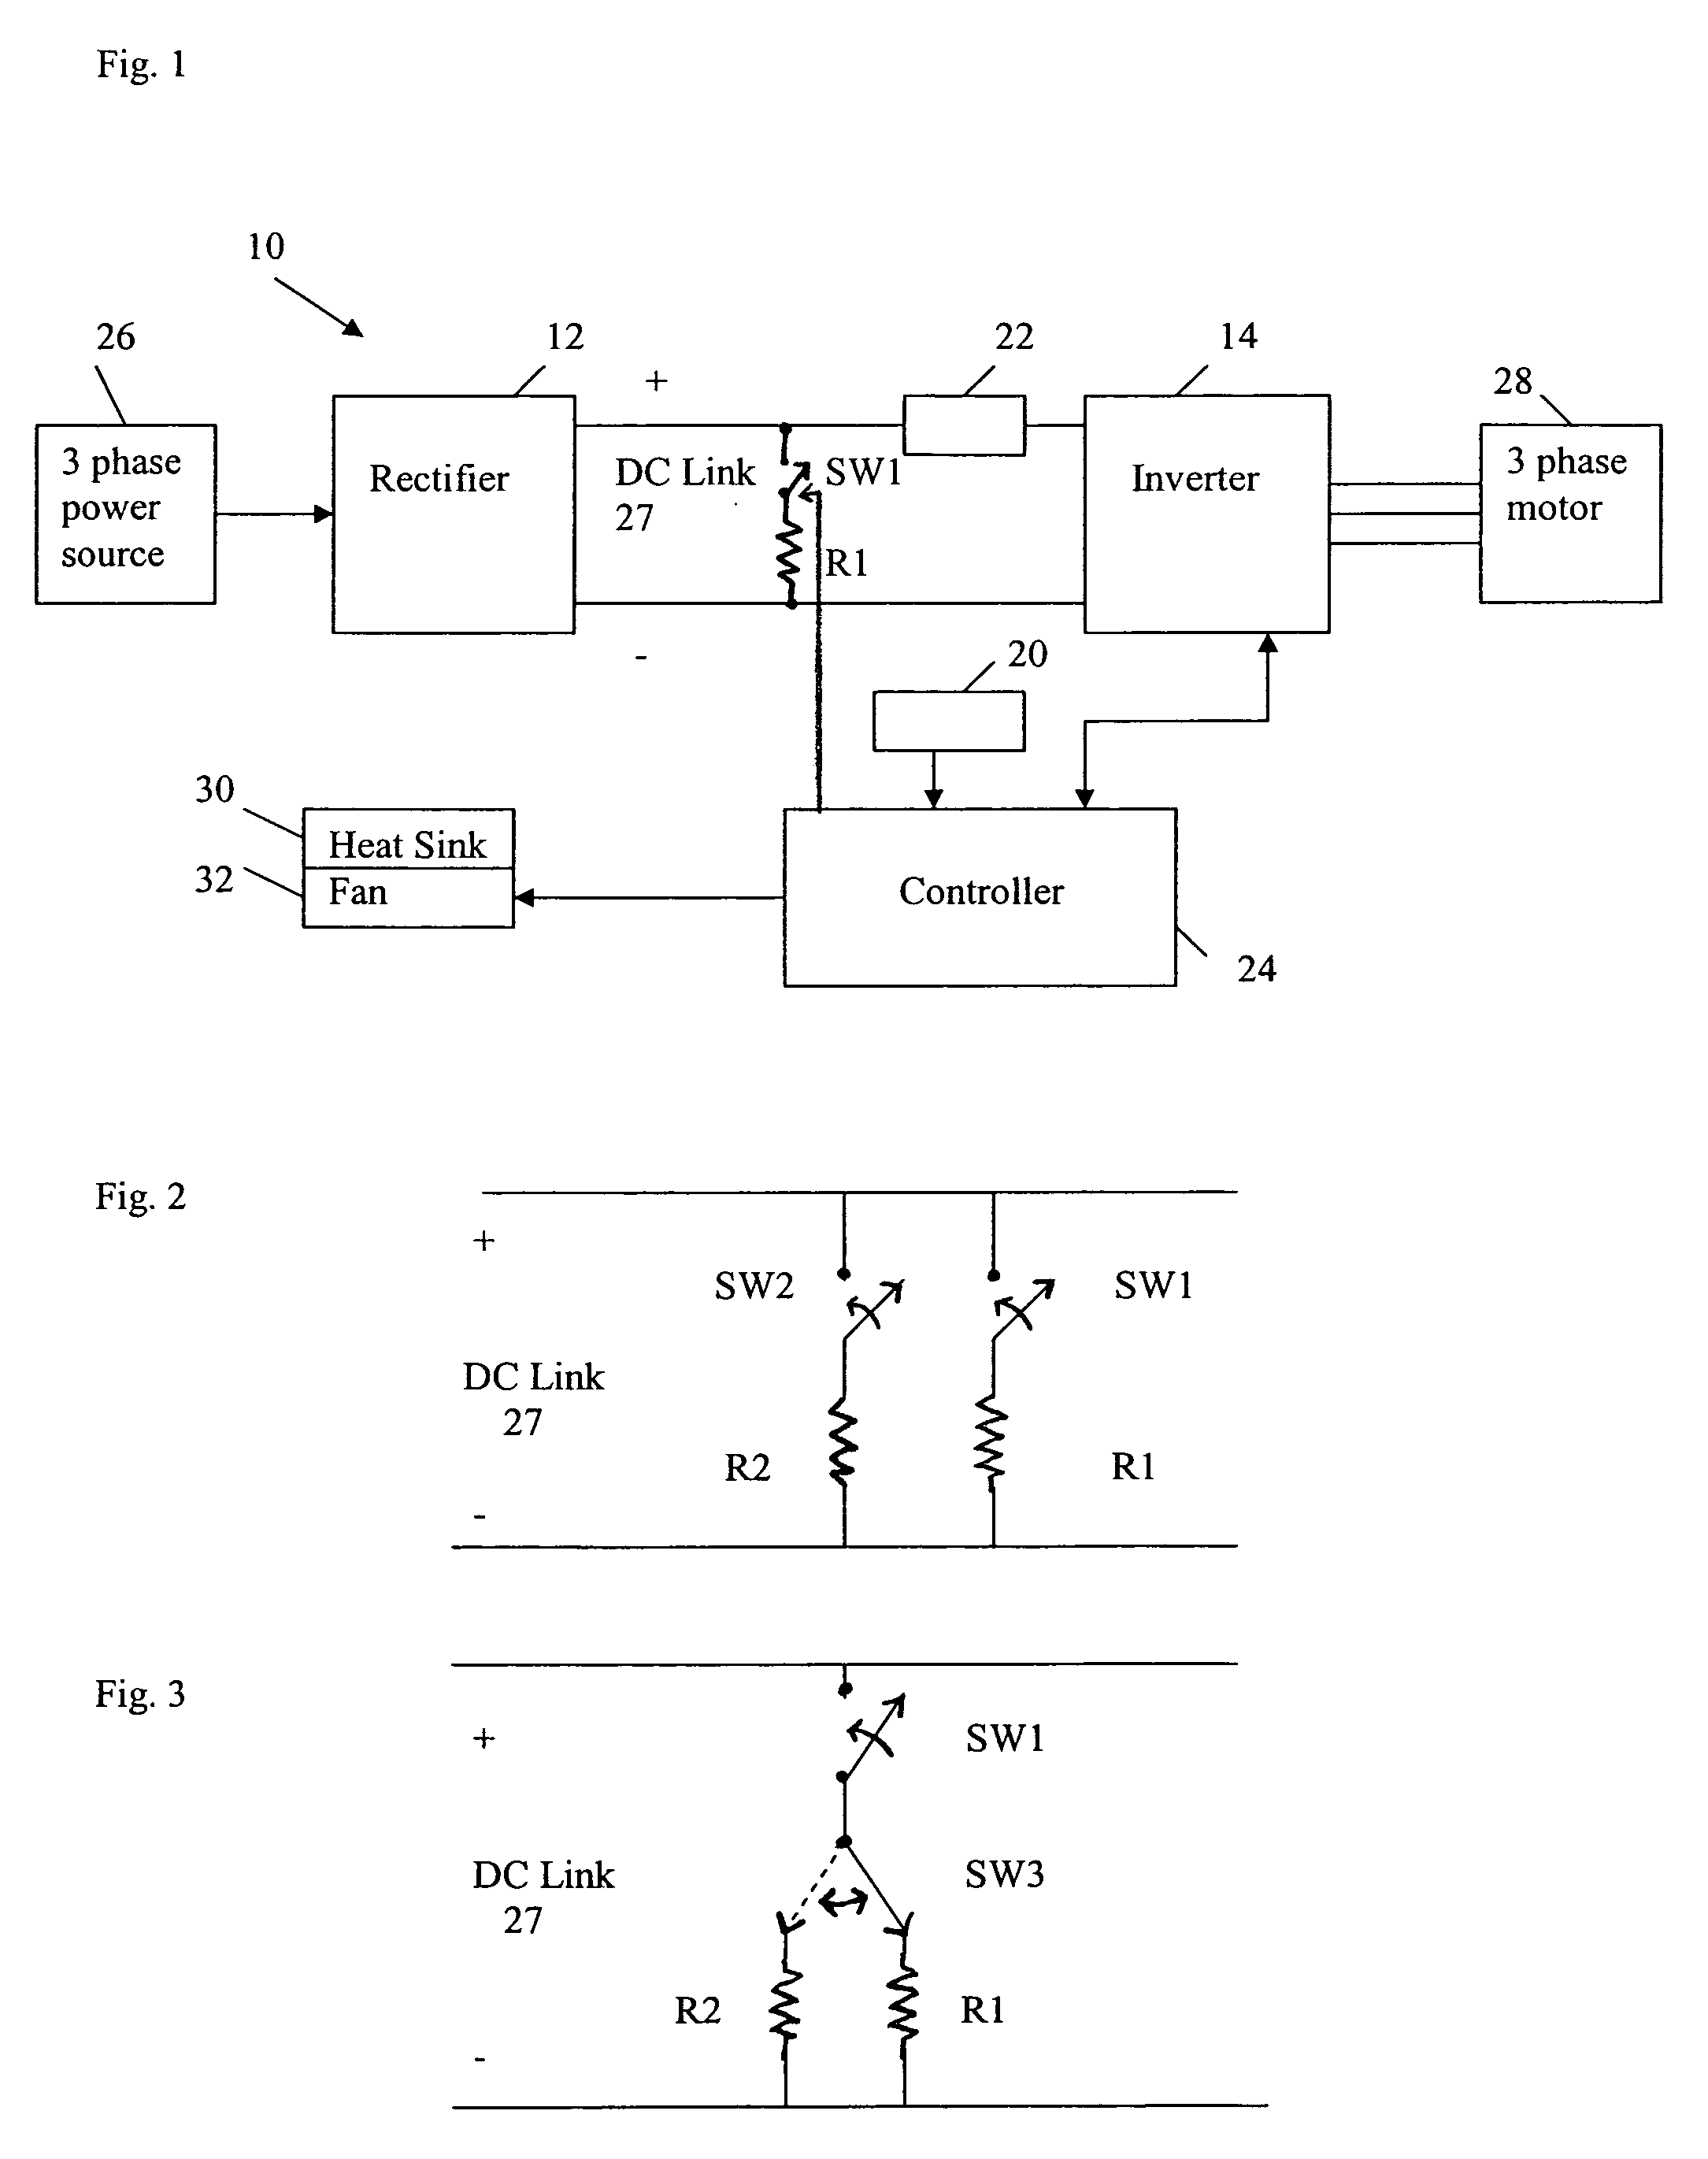 Thermal regulation of AC drive